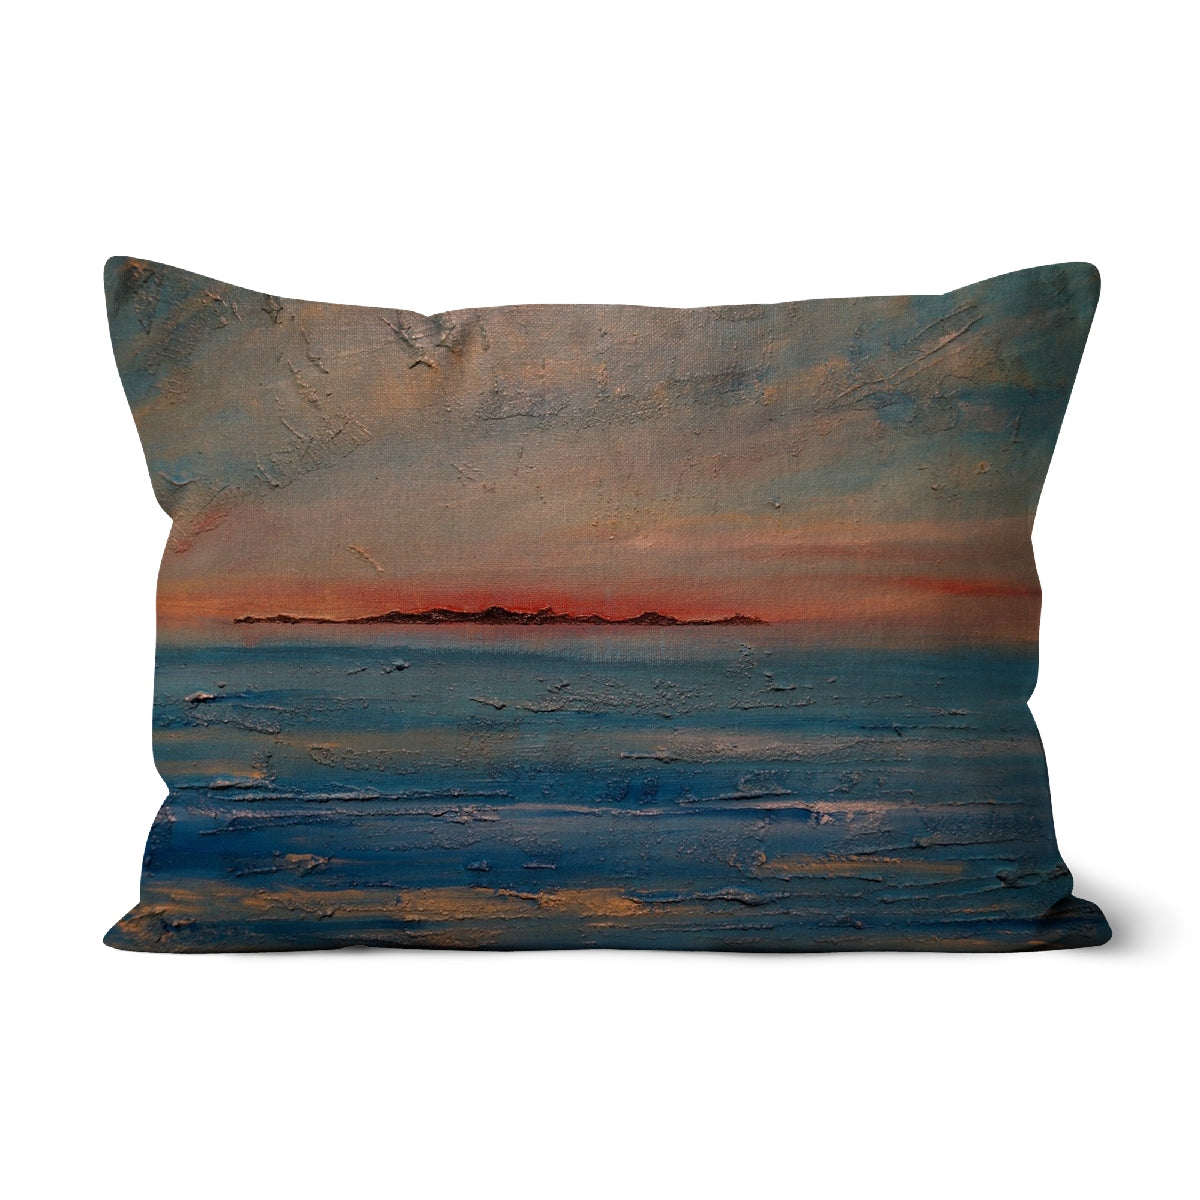 Gigha Sunset Art Gifts Cushion-Cushions-Hebridean Islands Art Gallery-Linen-19"x13"-Paintings, Prints, Homeware, Art Gifts From Scotland By Scottish Artist Kevin Hunter